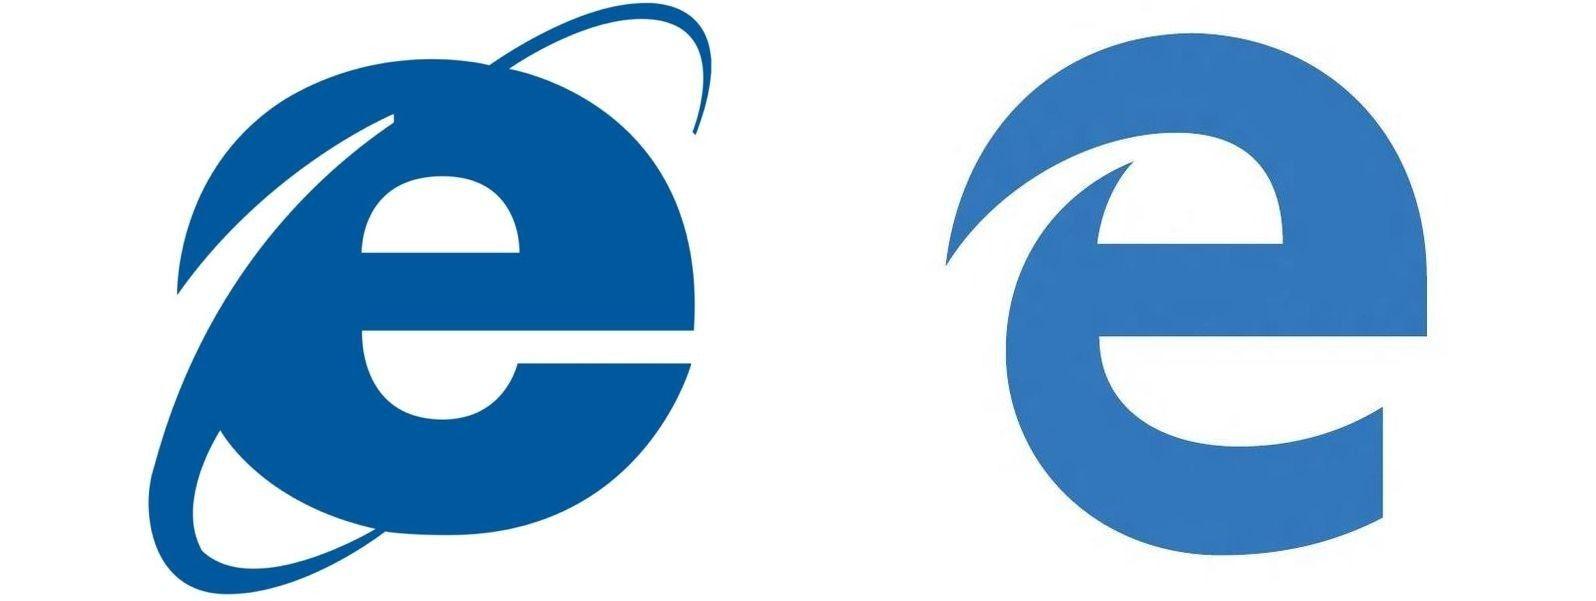 Internet Web Browser Logo - The logo for the Microsoft Edge web browser looks very familiar